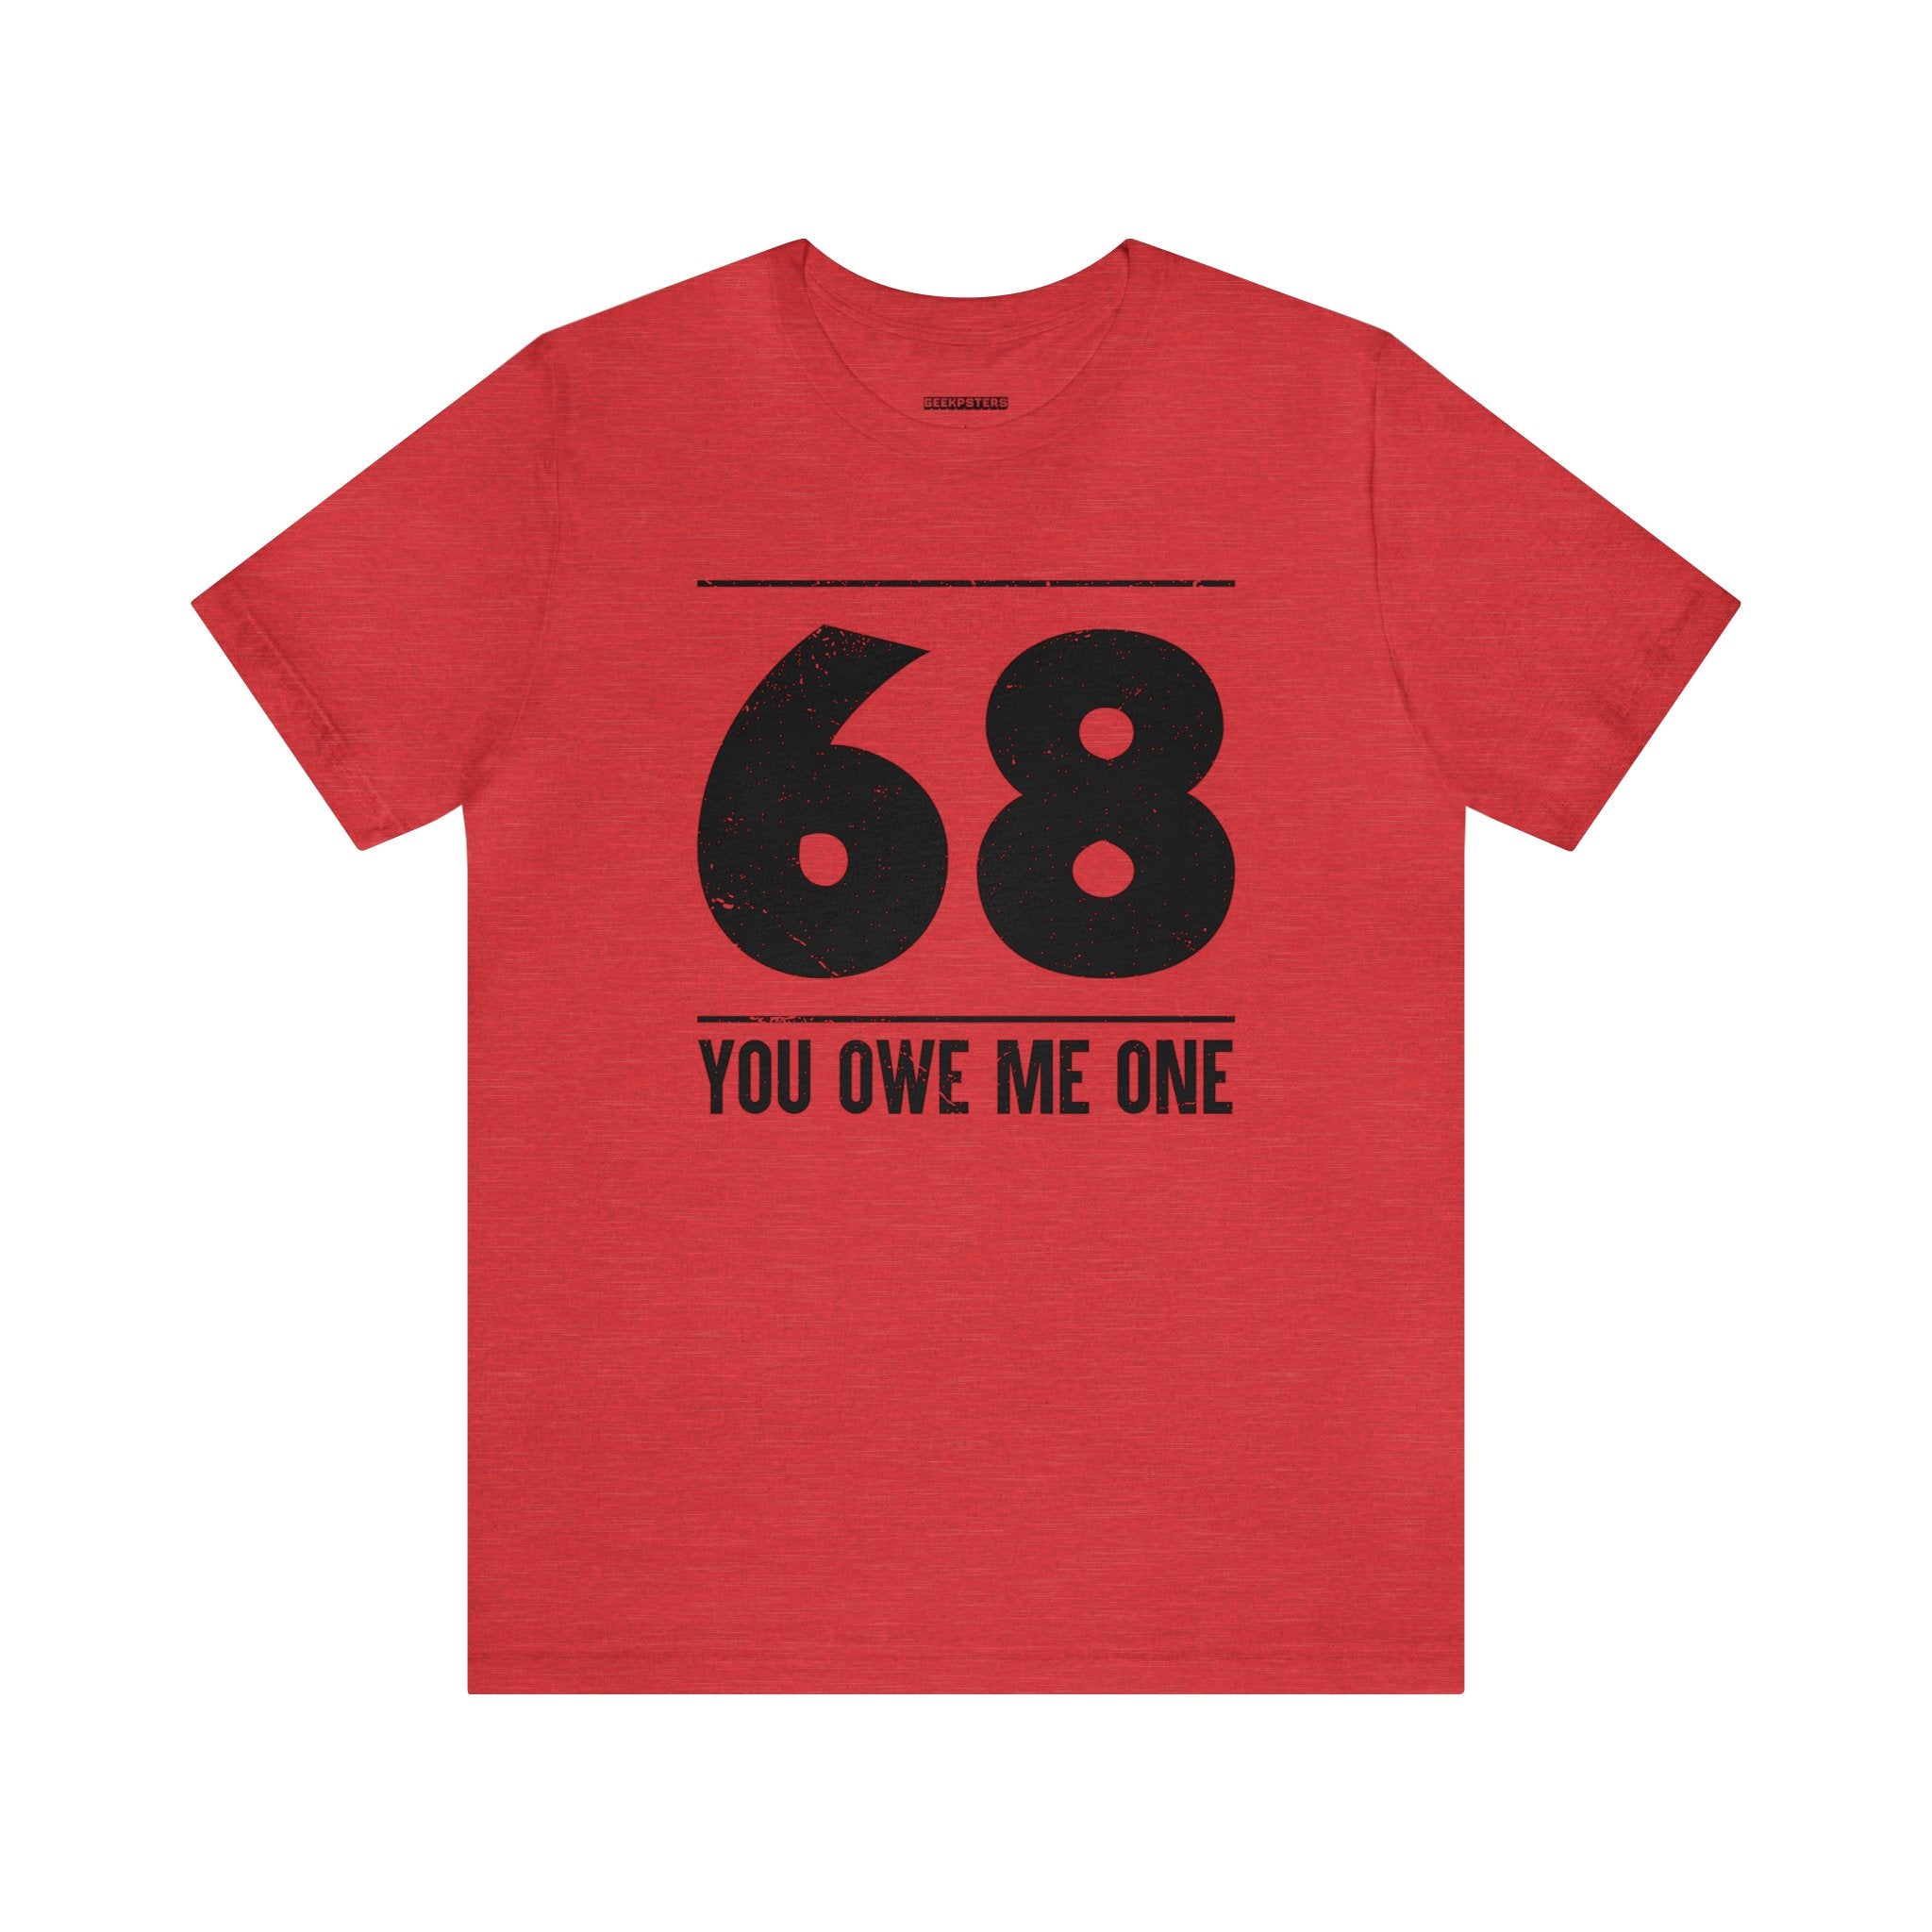 Get your hands on this geeky 68 You Owe Me One t-shirt with the number 66 printed on it. An awesome deal that you shouldn't miss!